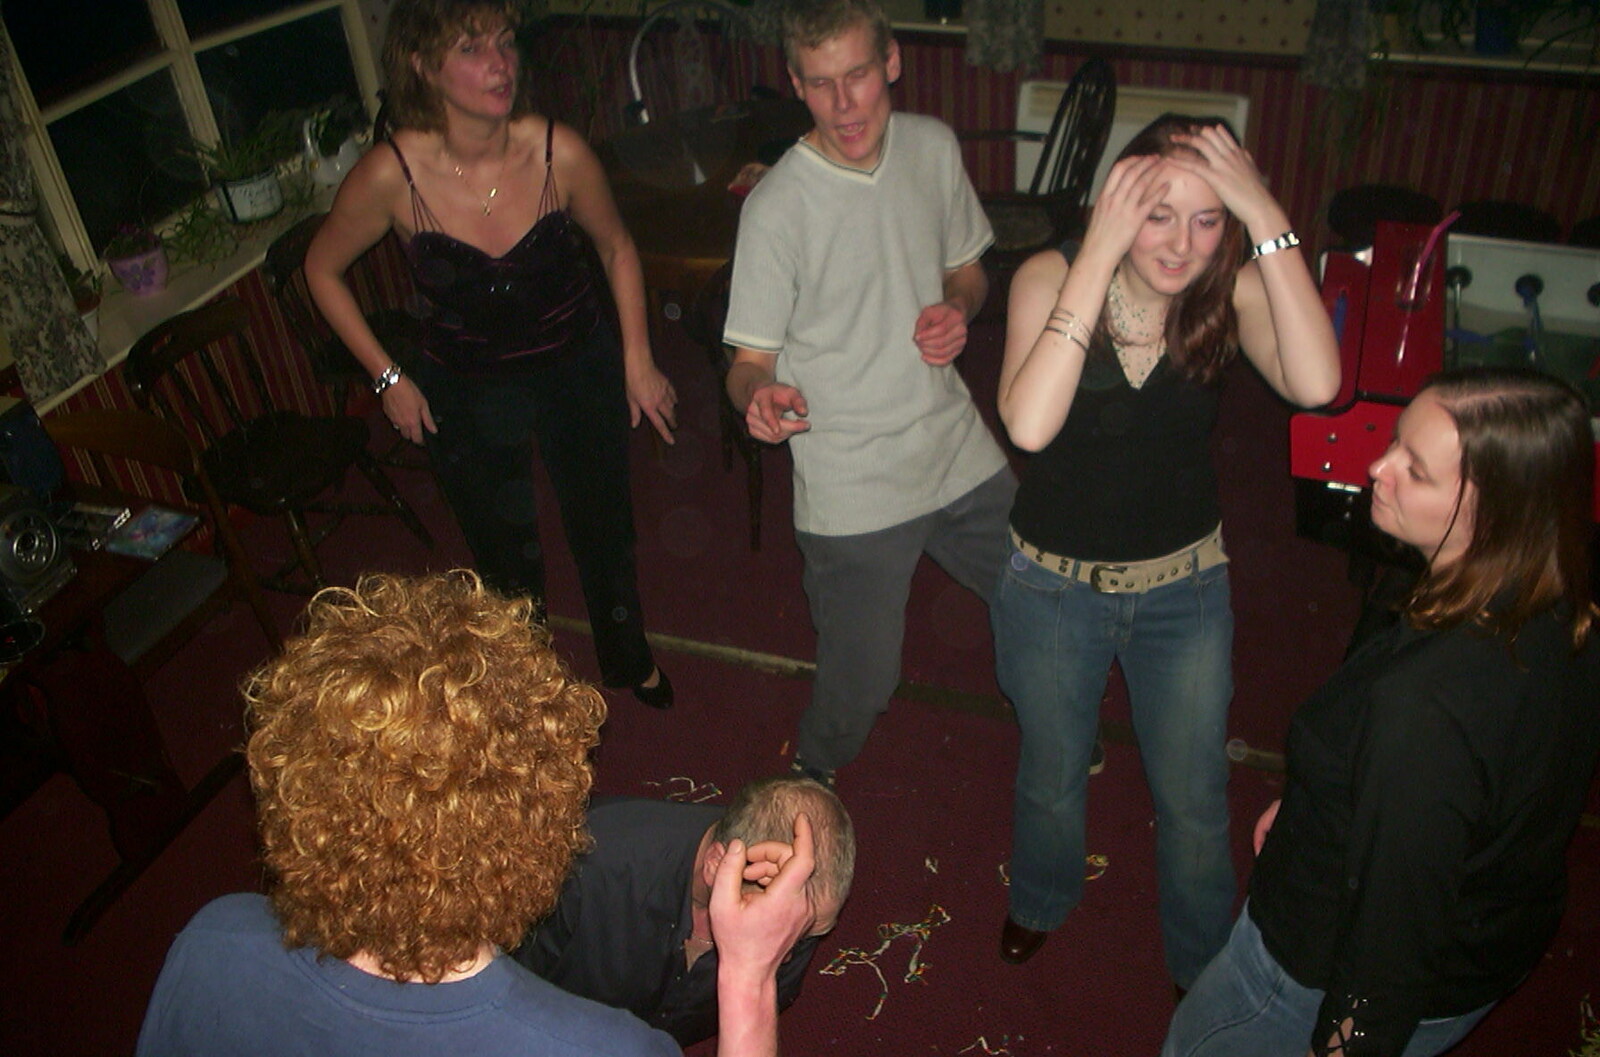 New Year's Eve at the Swan Inn, Brome, Suffolk - 31st December 2002: A Brome Swan disco